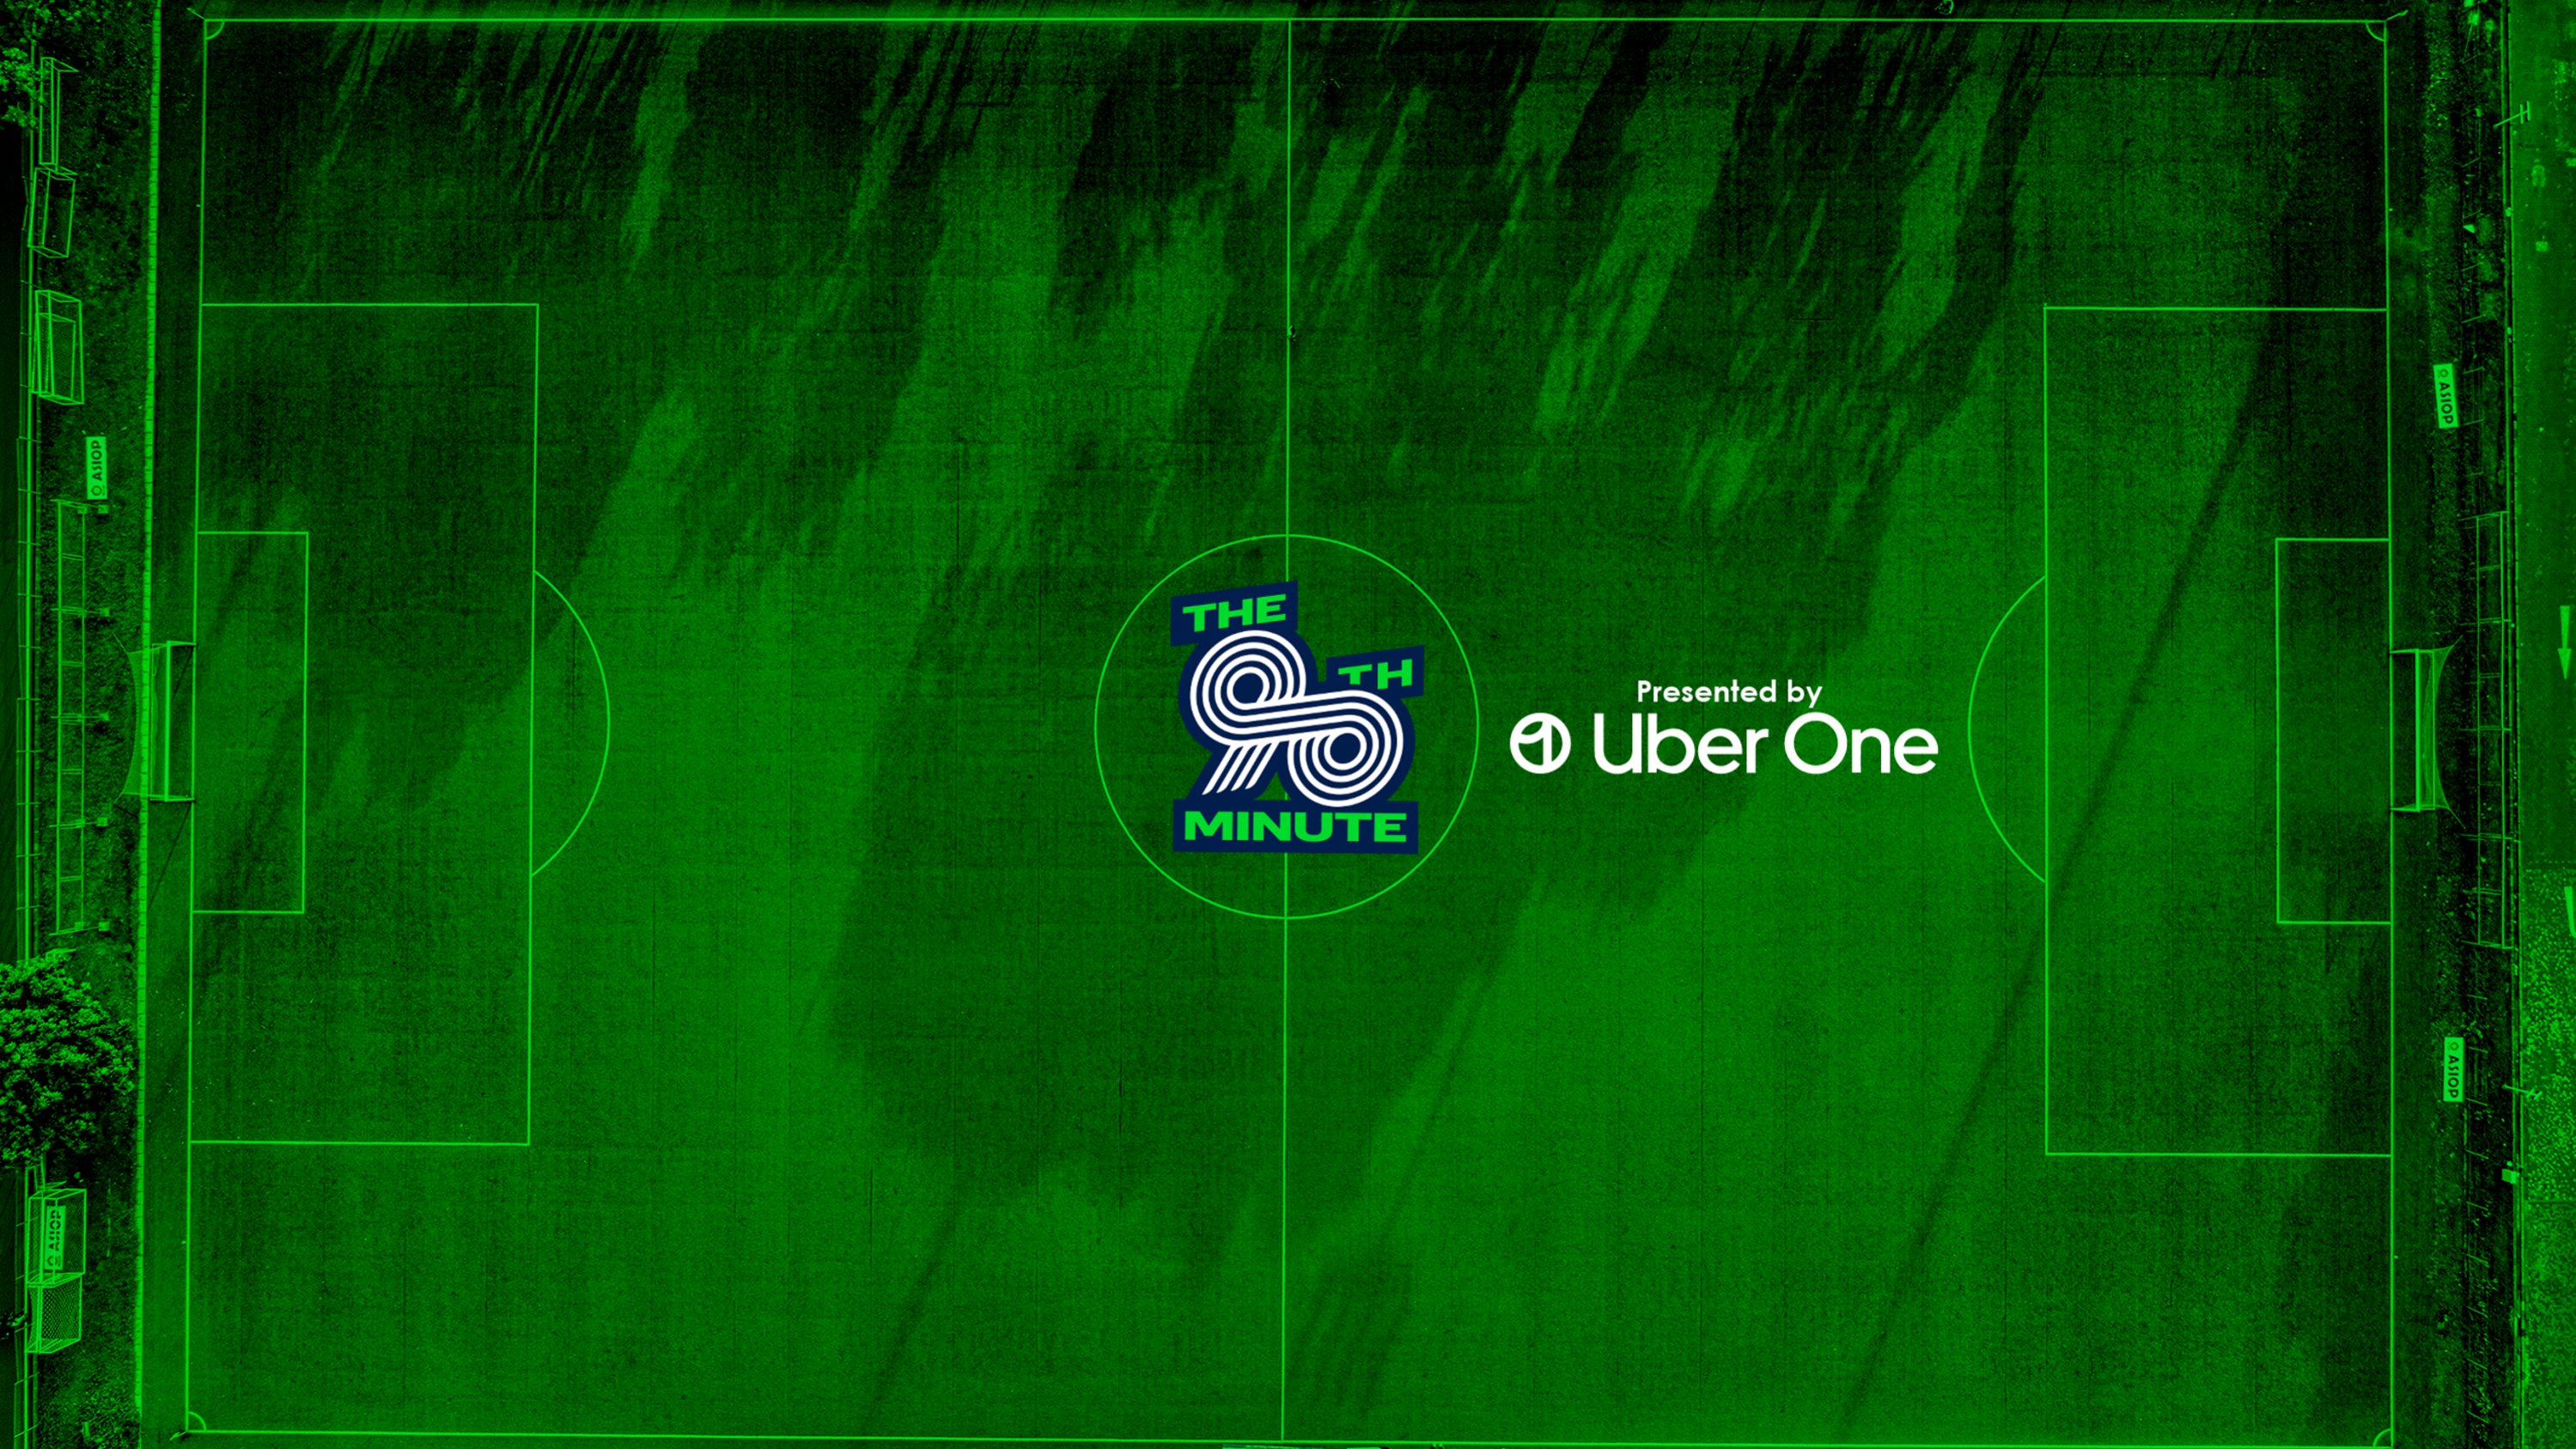 Read more about the article Playmaker Capital Inc. Announces Uber One as Presenting Sponsor of Soccer Focused Brand The 90th Minute